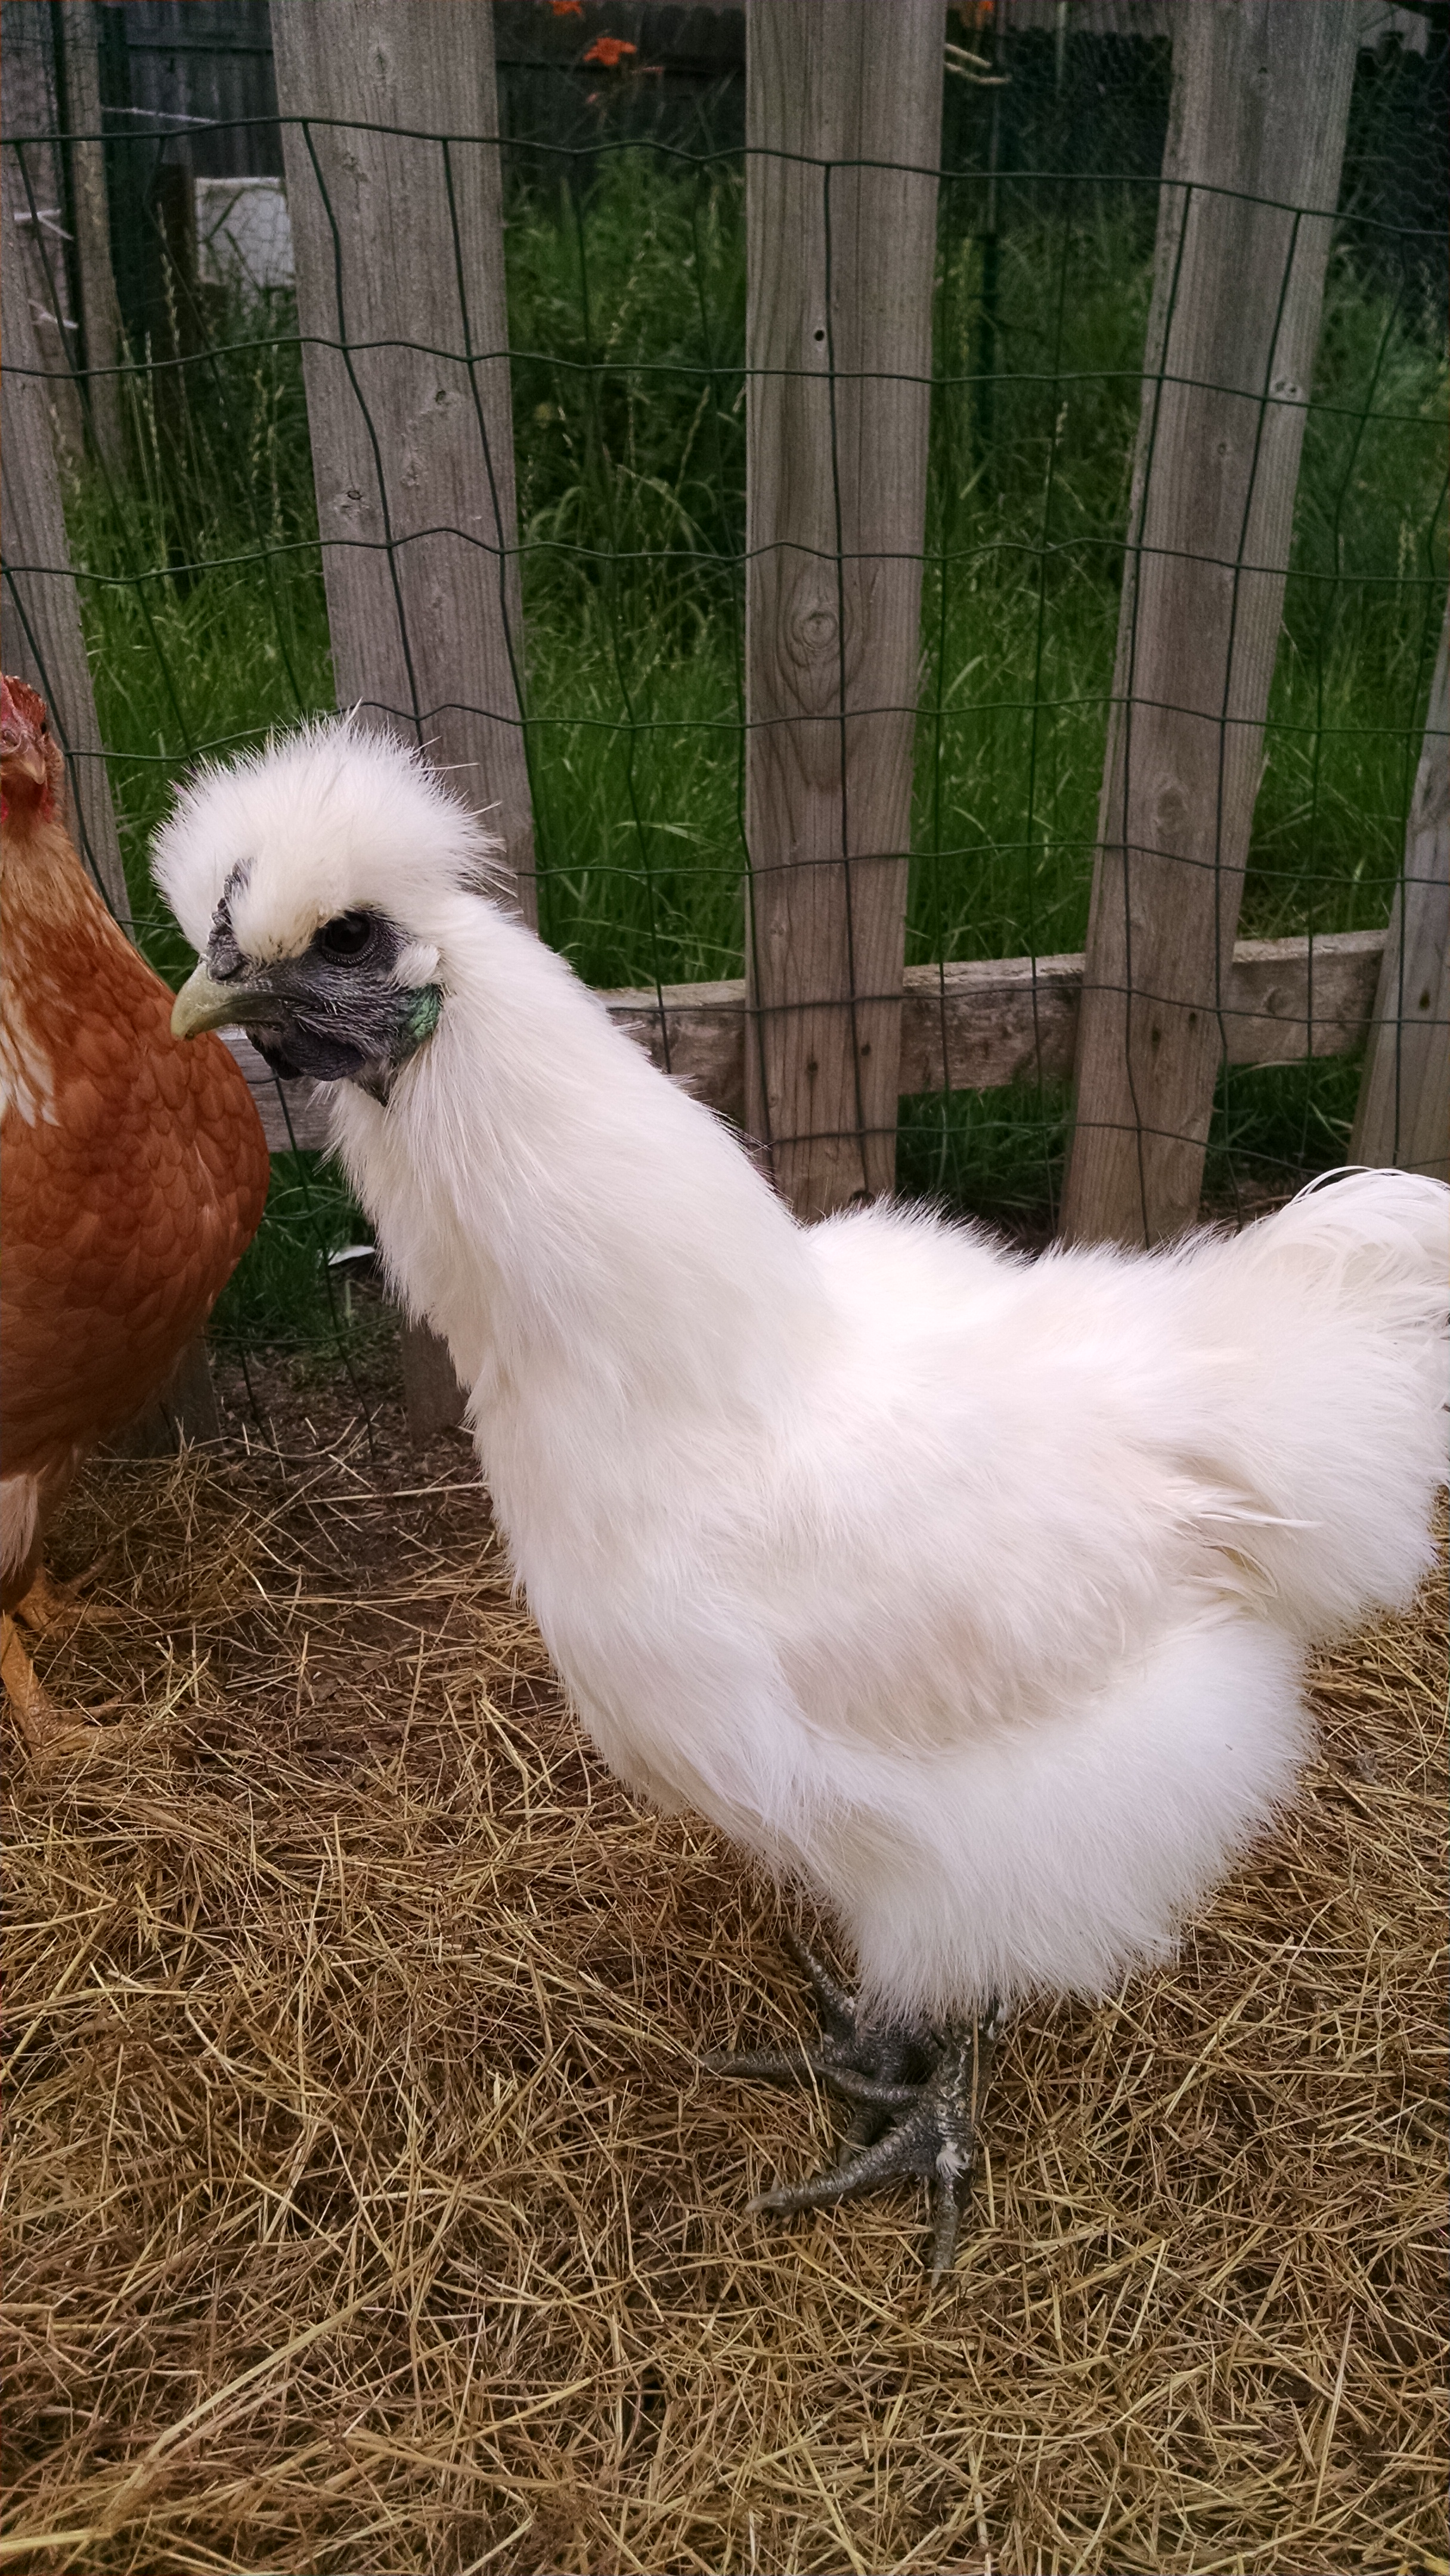 14 week old silkie named Moe, can't tell if boy or girl yet.